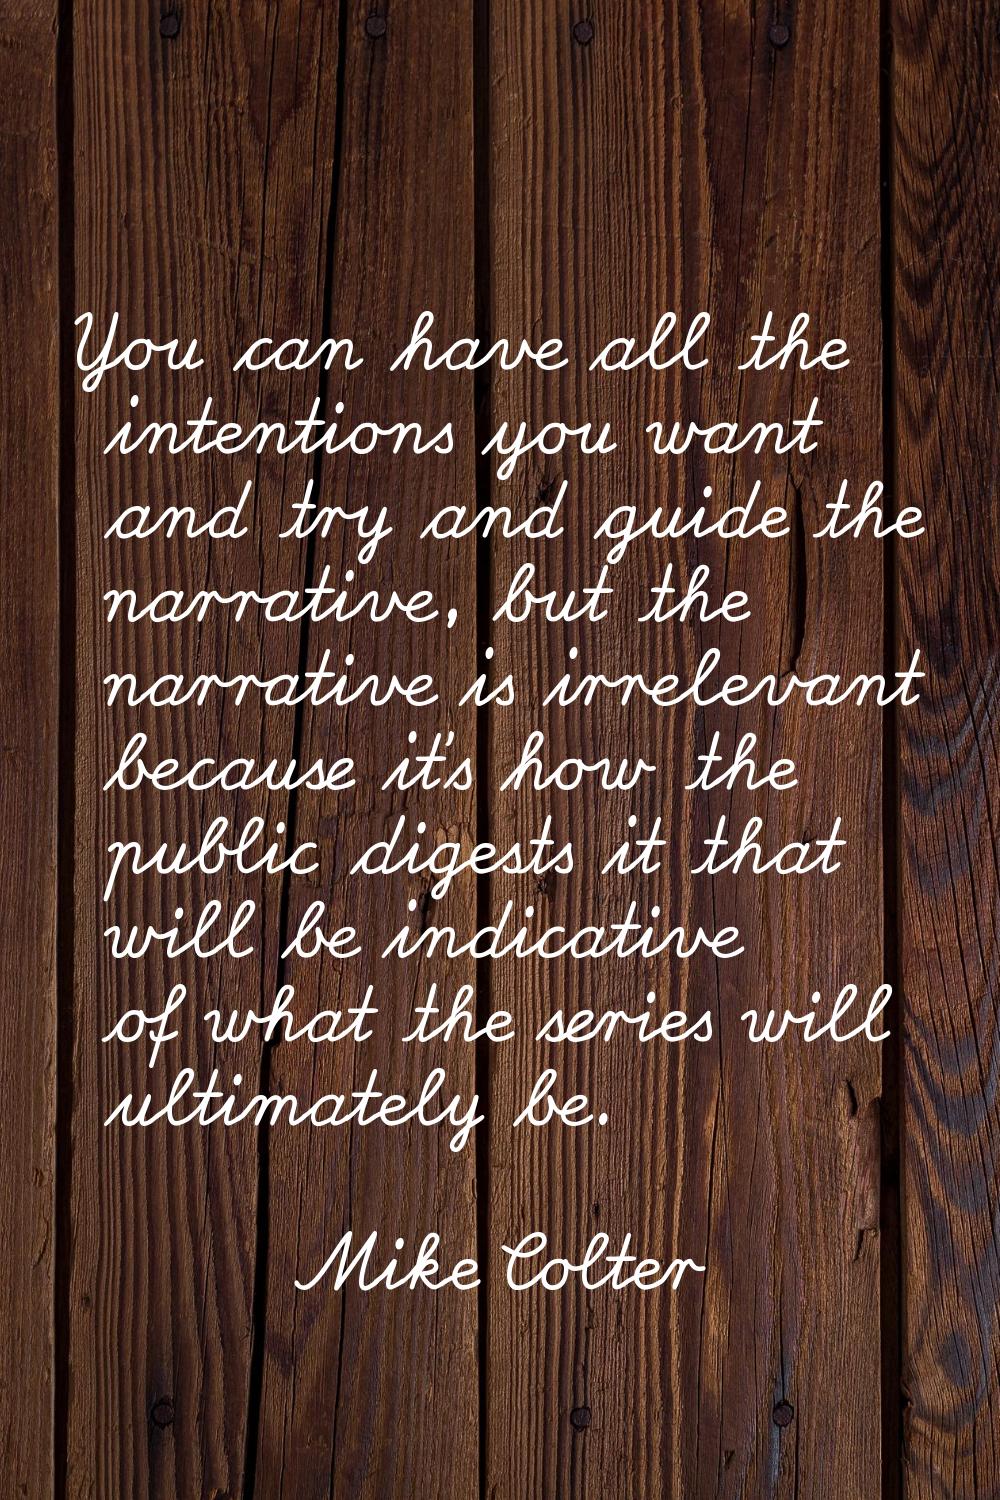 You can have all the intentions you want and try and guide the narrative, but the narrative is irre